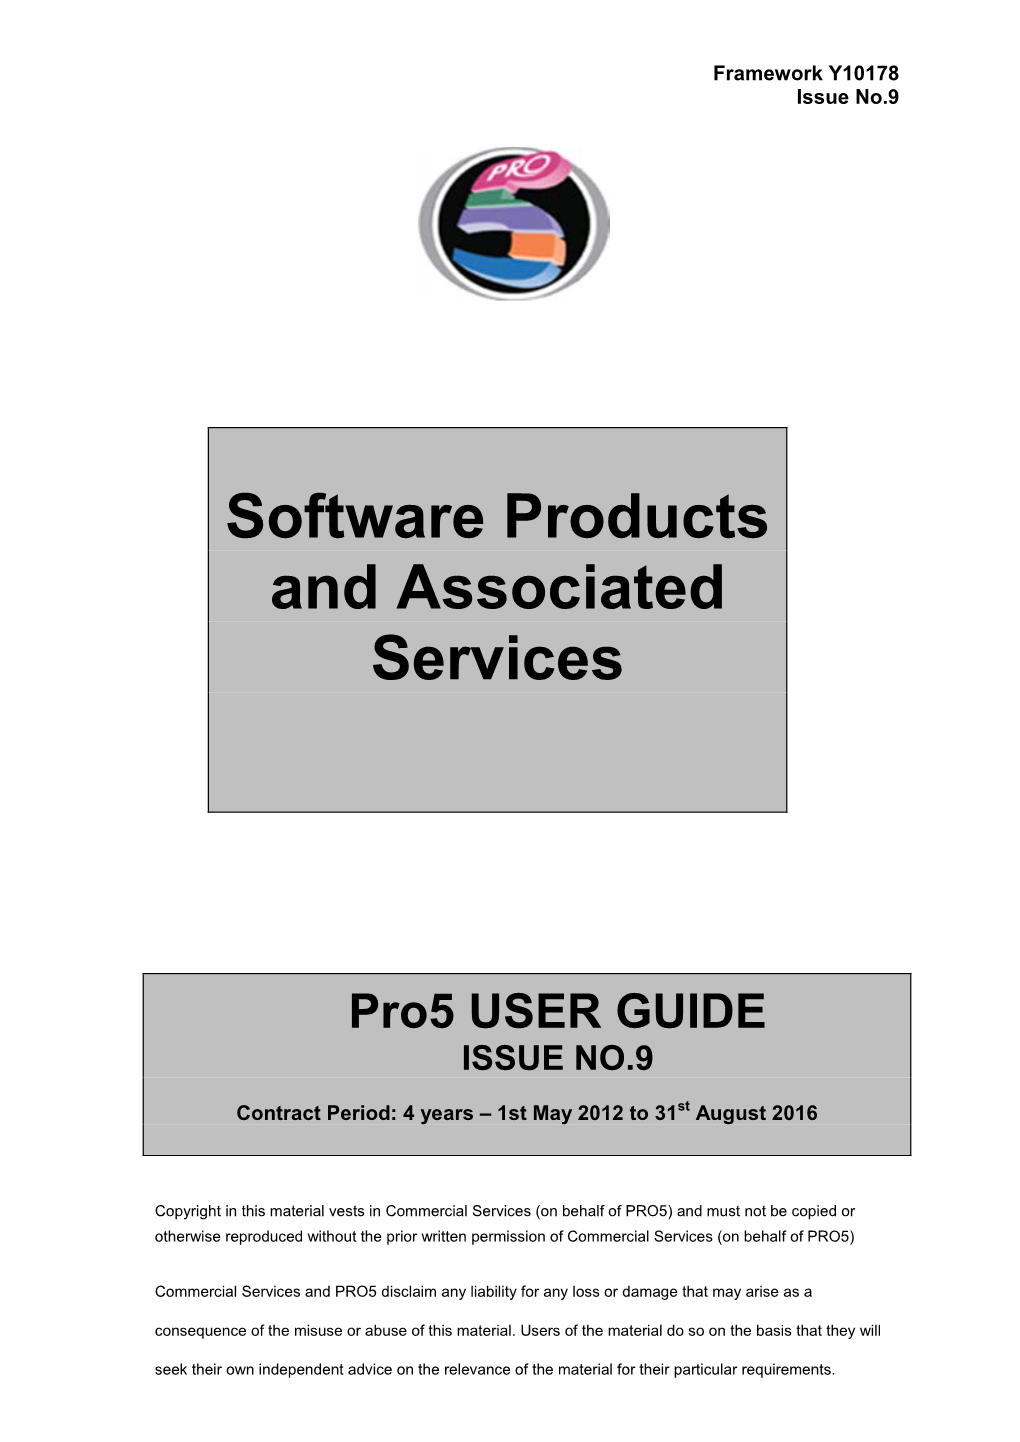 Software Products and Associated Services